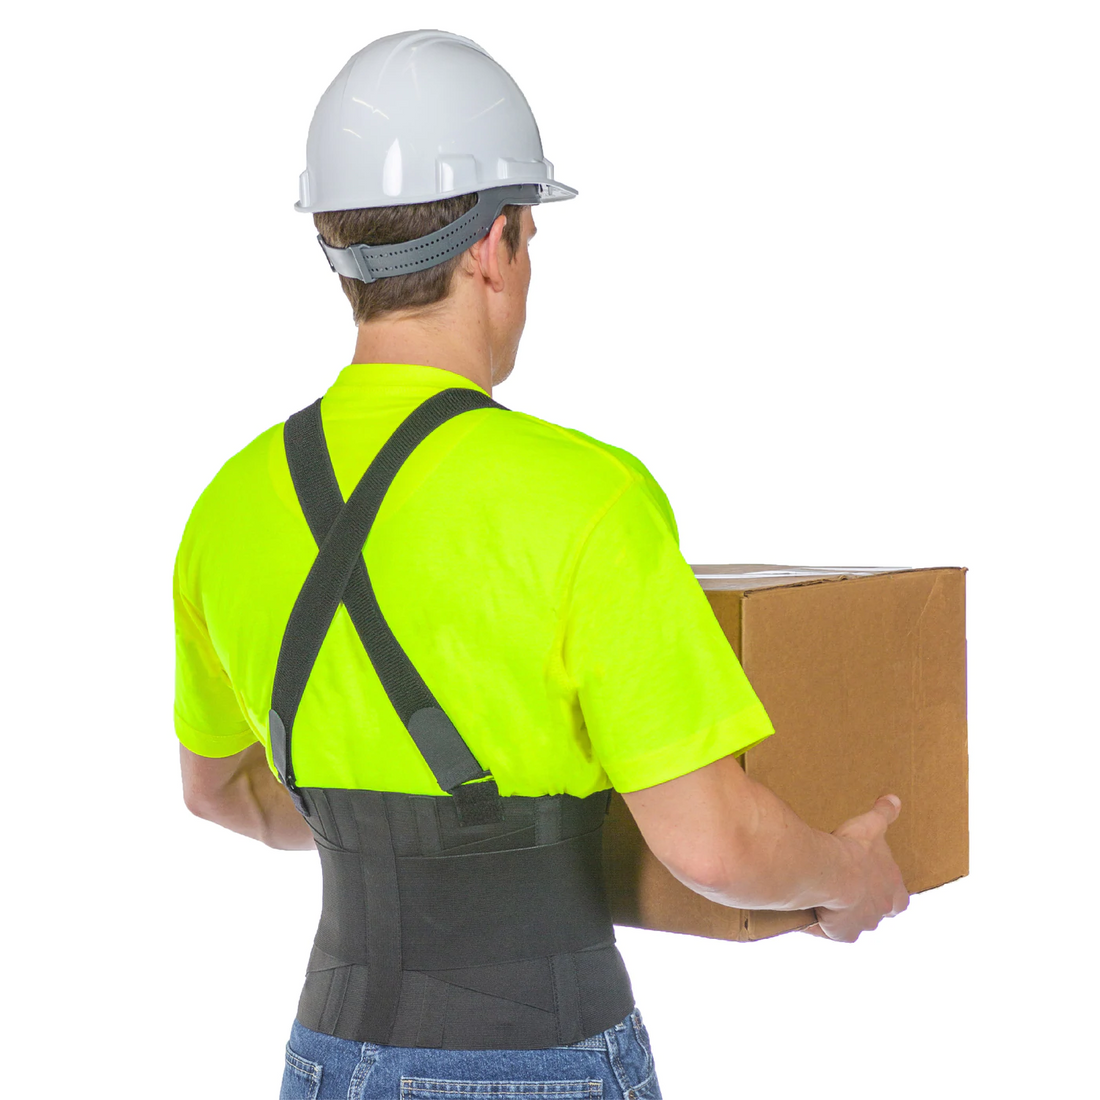 What are the benefits of wearing a back brace?